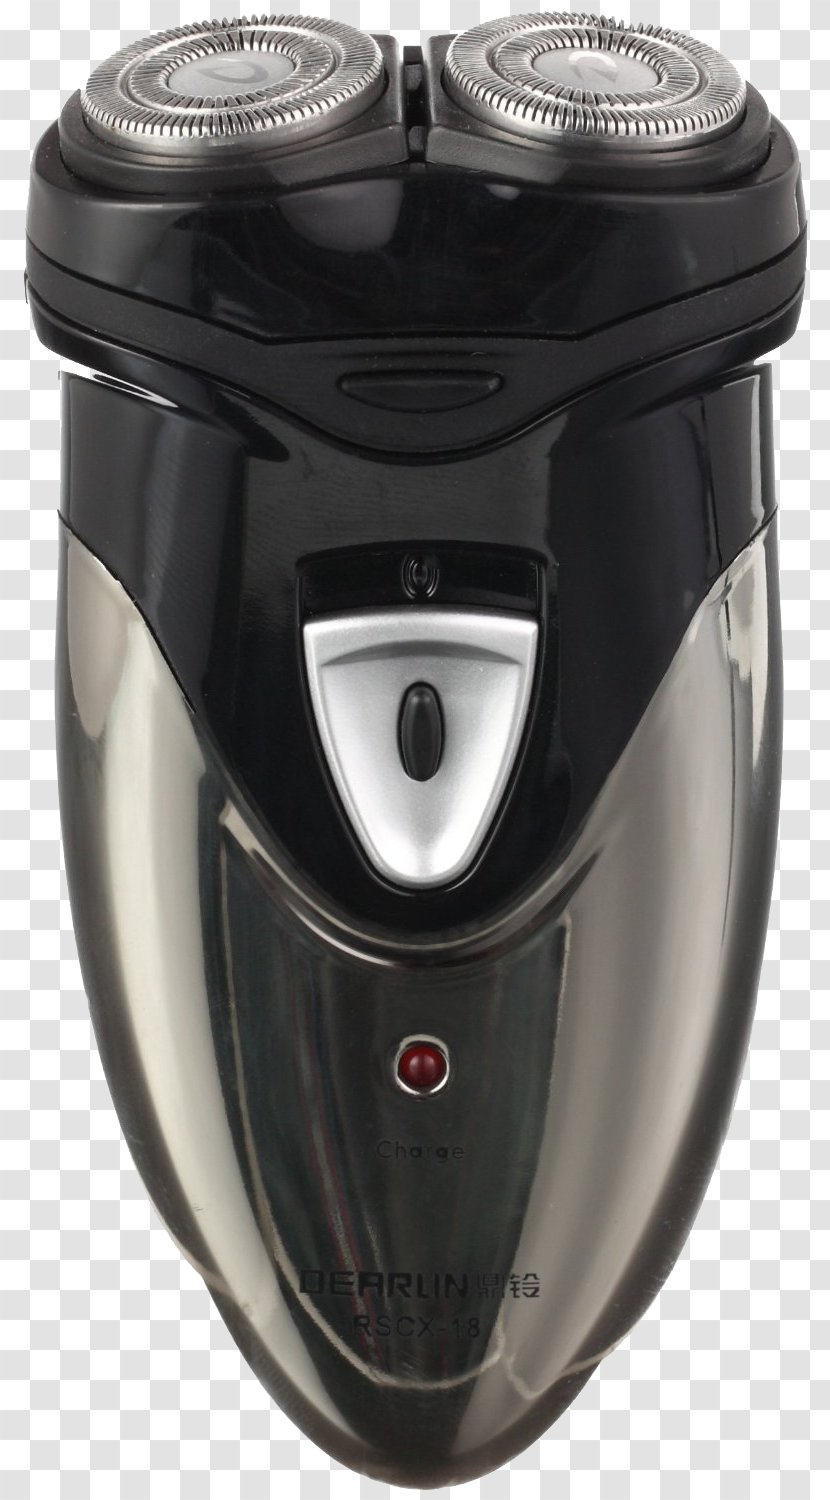 Electric Razor Safety - Small Appliance - Intelligent Anti-pinch Shall Transparent PNG